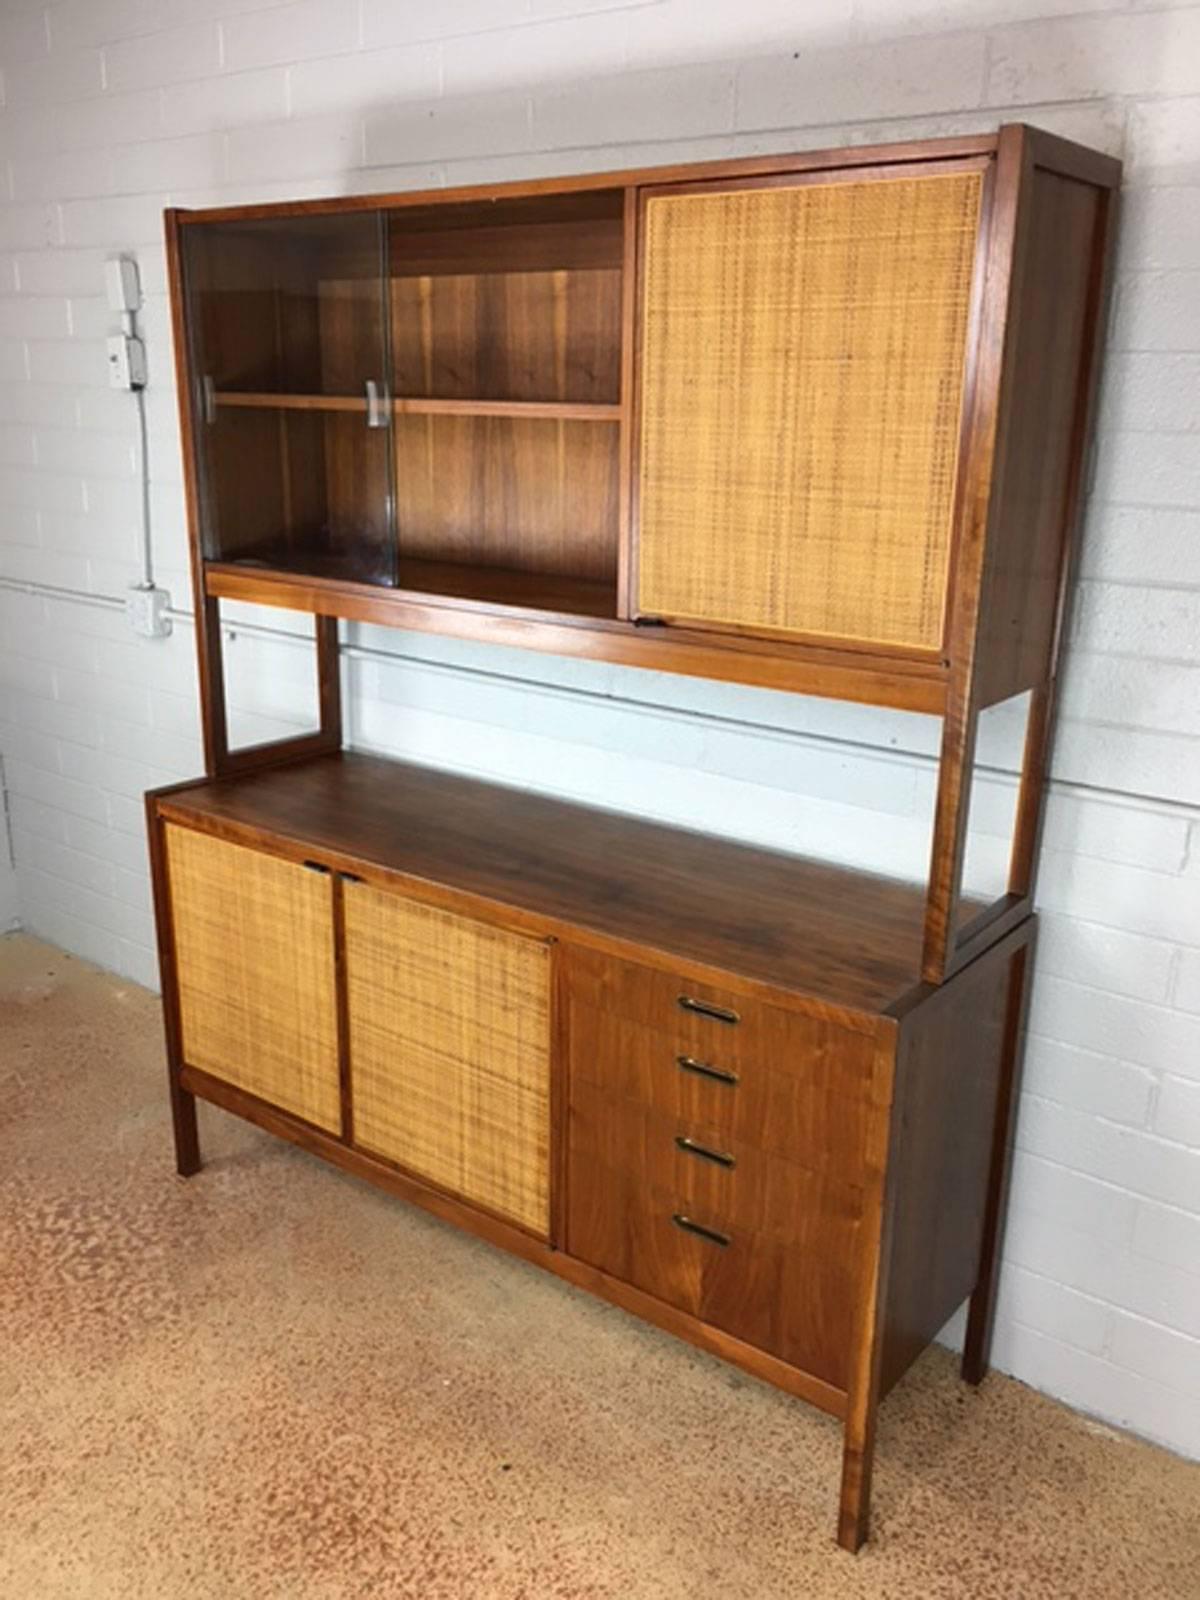 Rare Florence Knoll credenza with upper hutch half. Credenza may be used with or without upper portion. This piece was properly cared for throughout its long life.